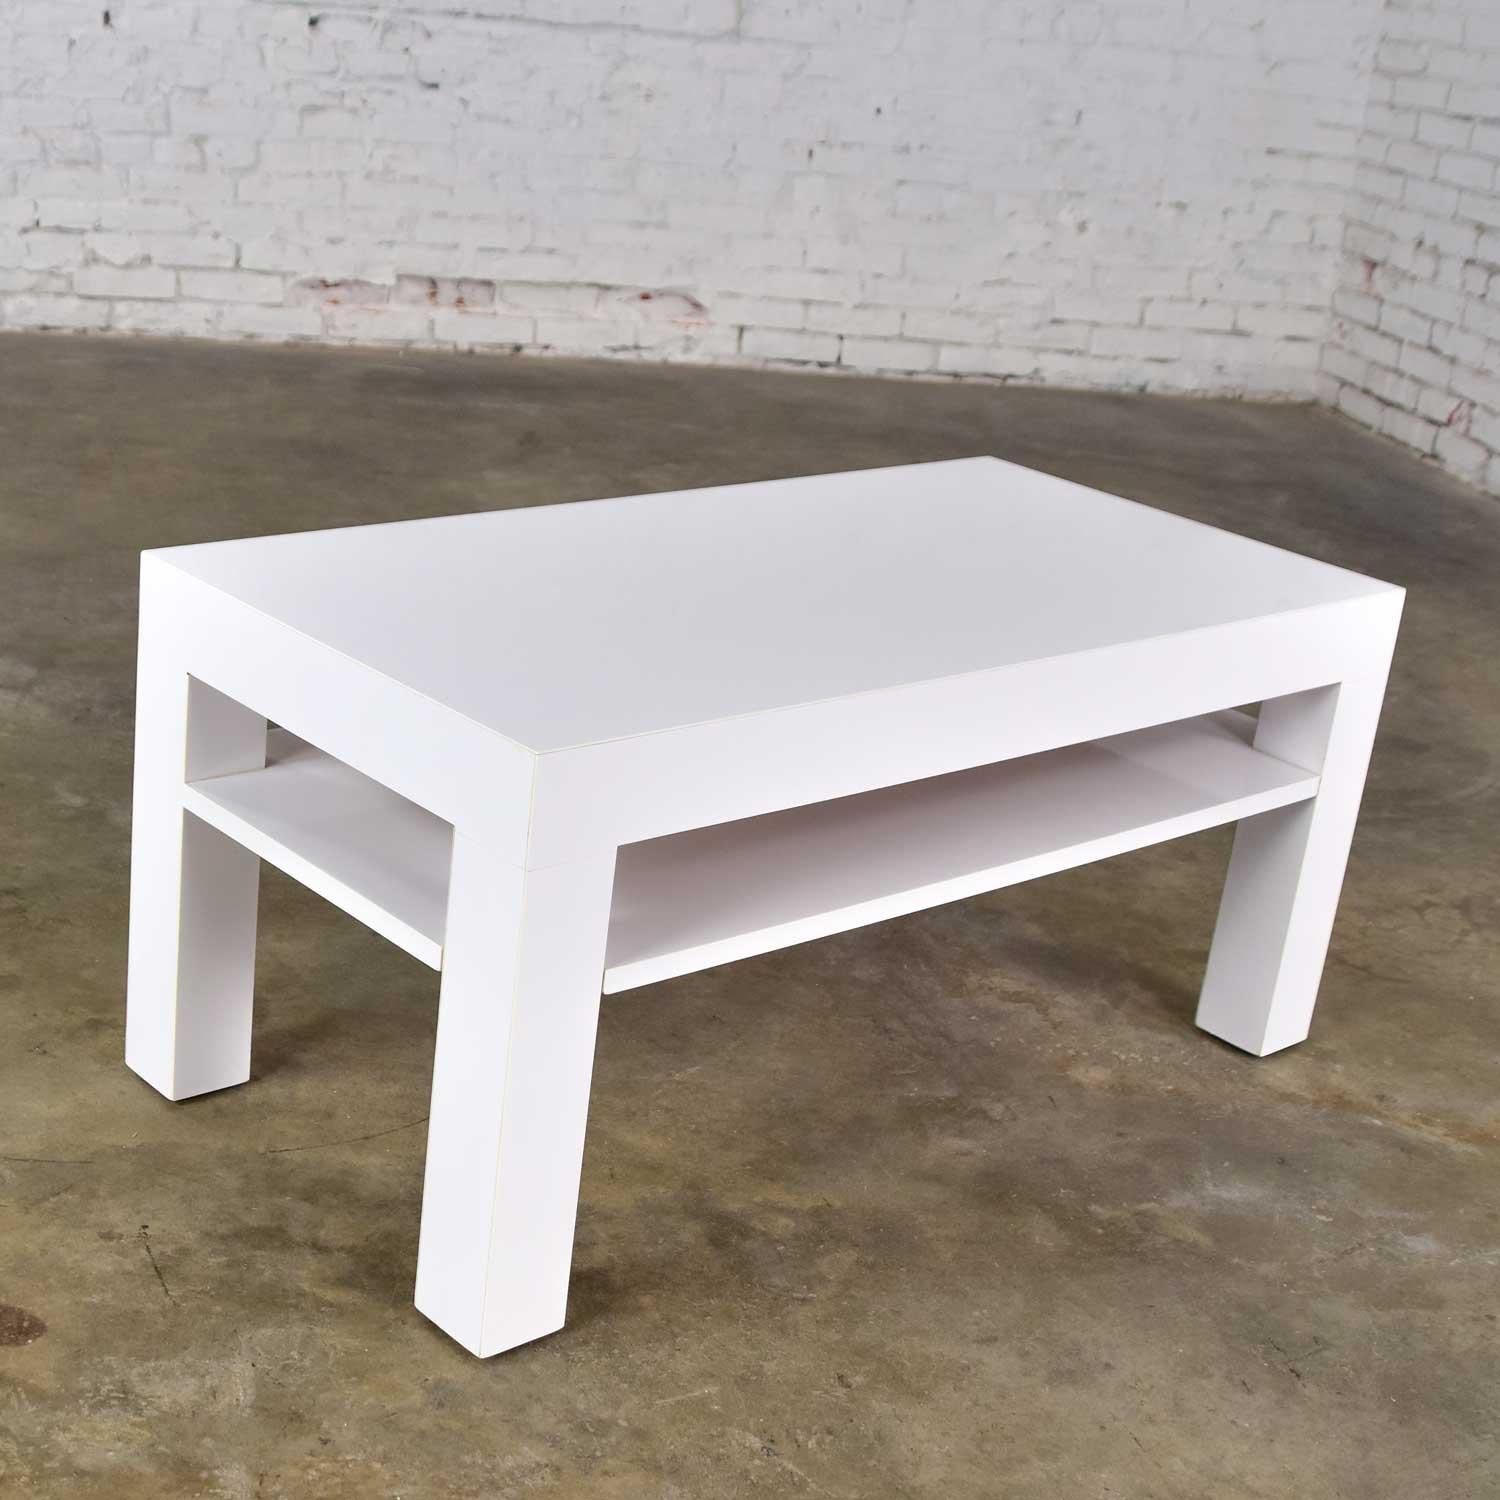 Mid-Century Modern Two-Tiered White Laminate Parson’s Style Coffee or End Table For Sale 3